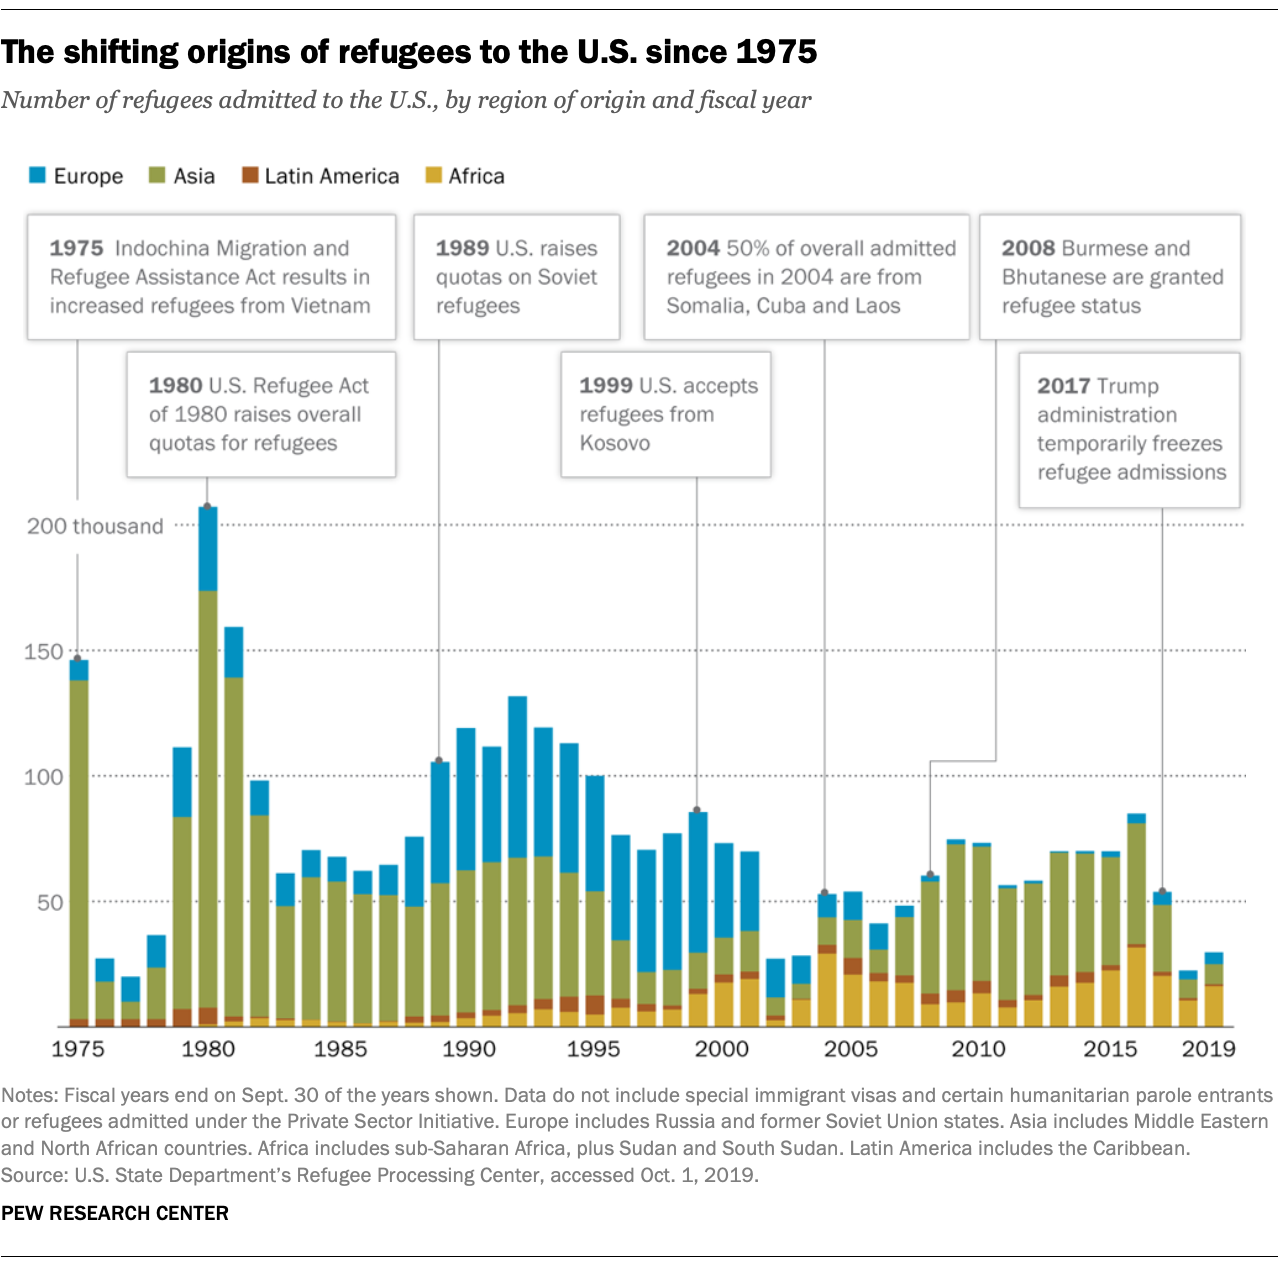 The shifting origins of refugees to the U.S. since 1975